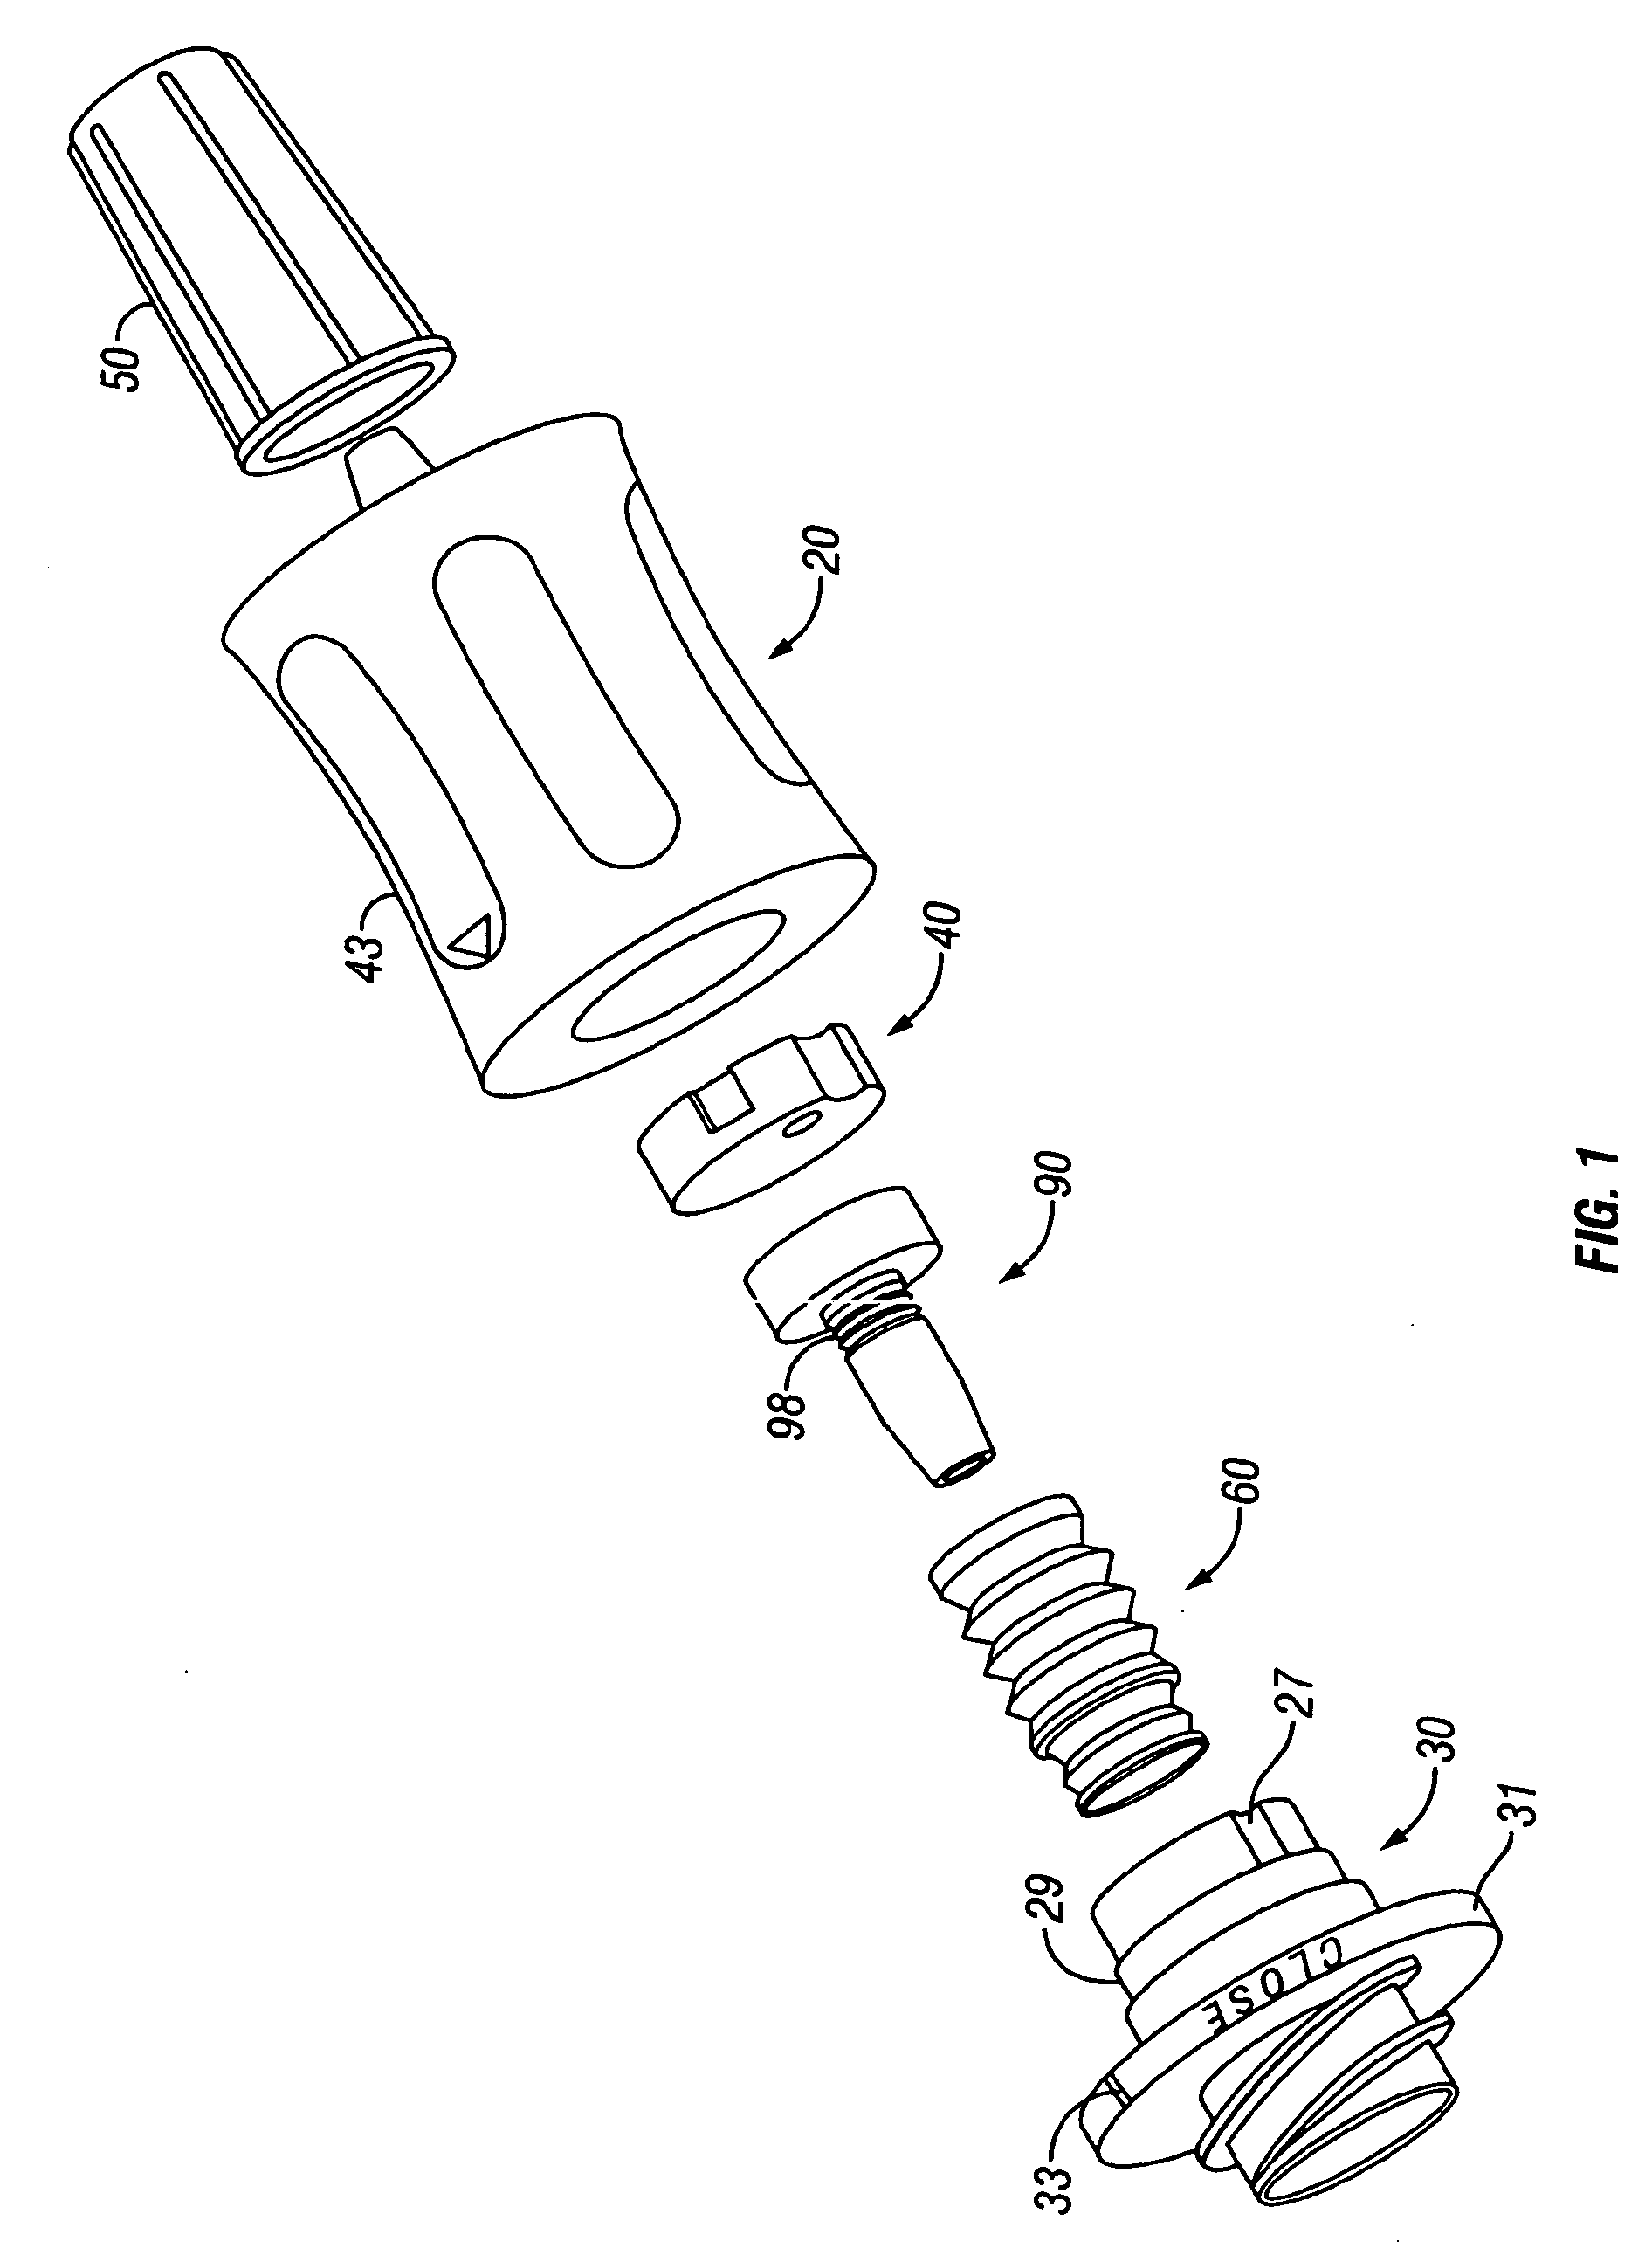 Needleless luer activated medical connector